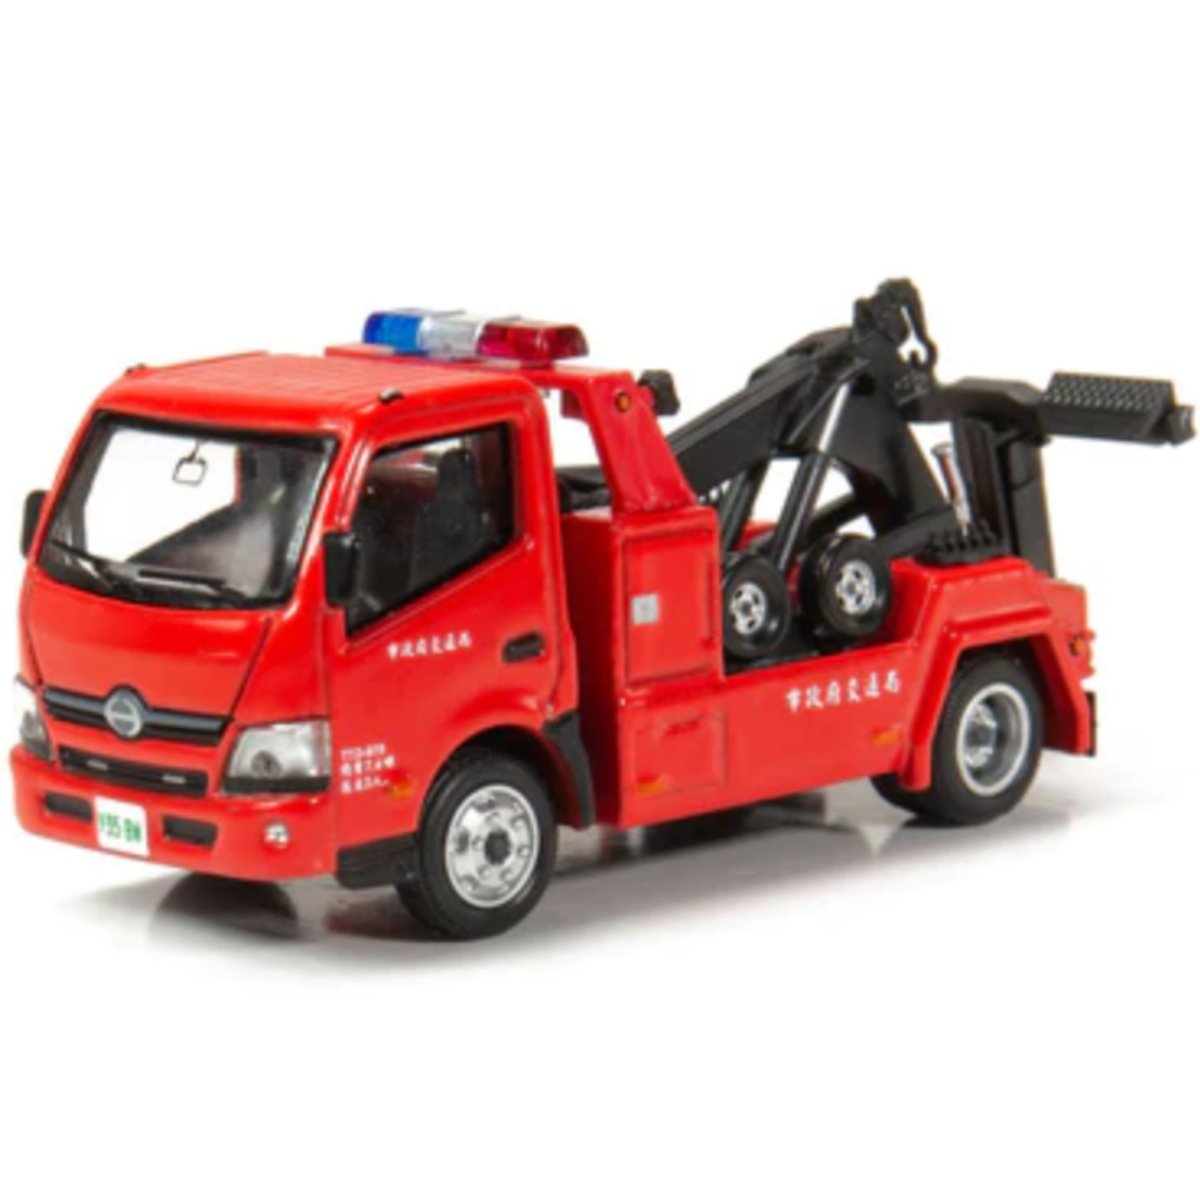 Tiny Models Hino 300 Tow Truck Red (1:64 Scale) - Phillips Hobbies